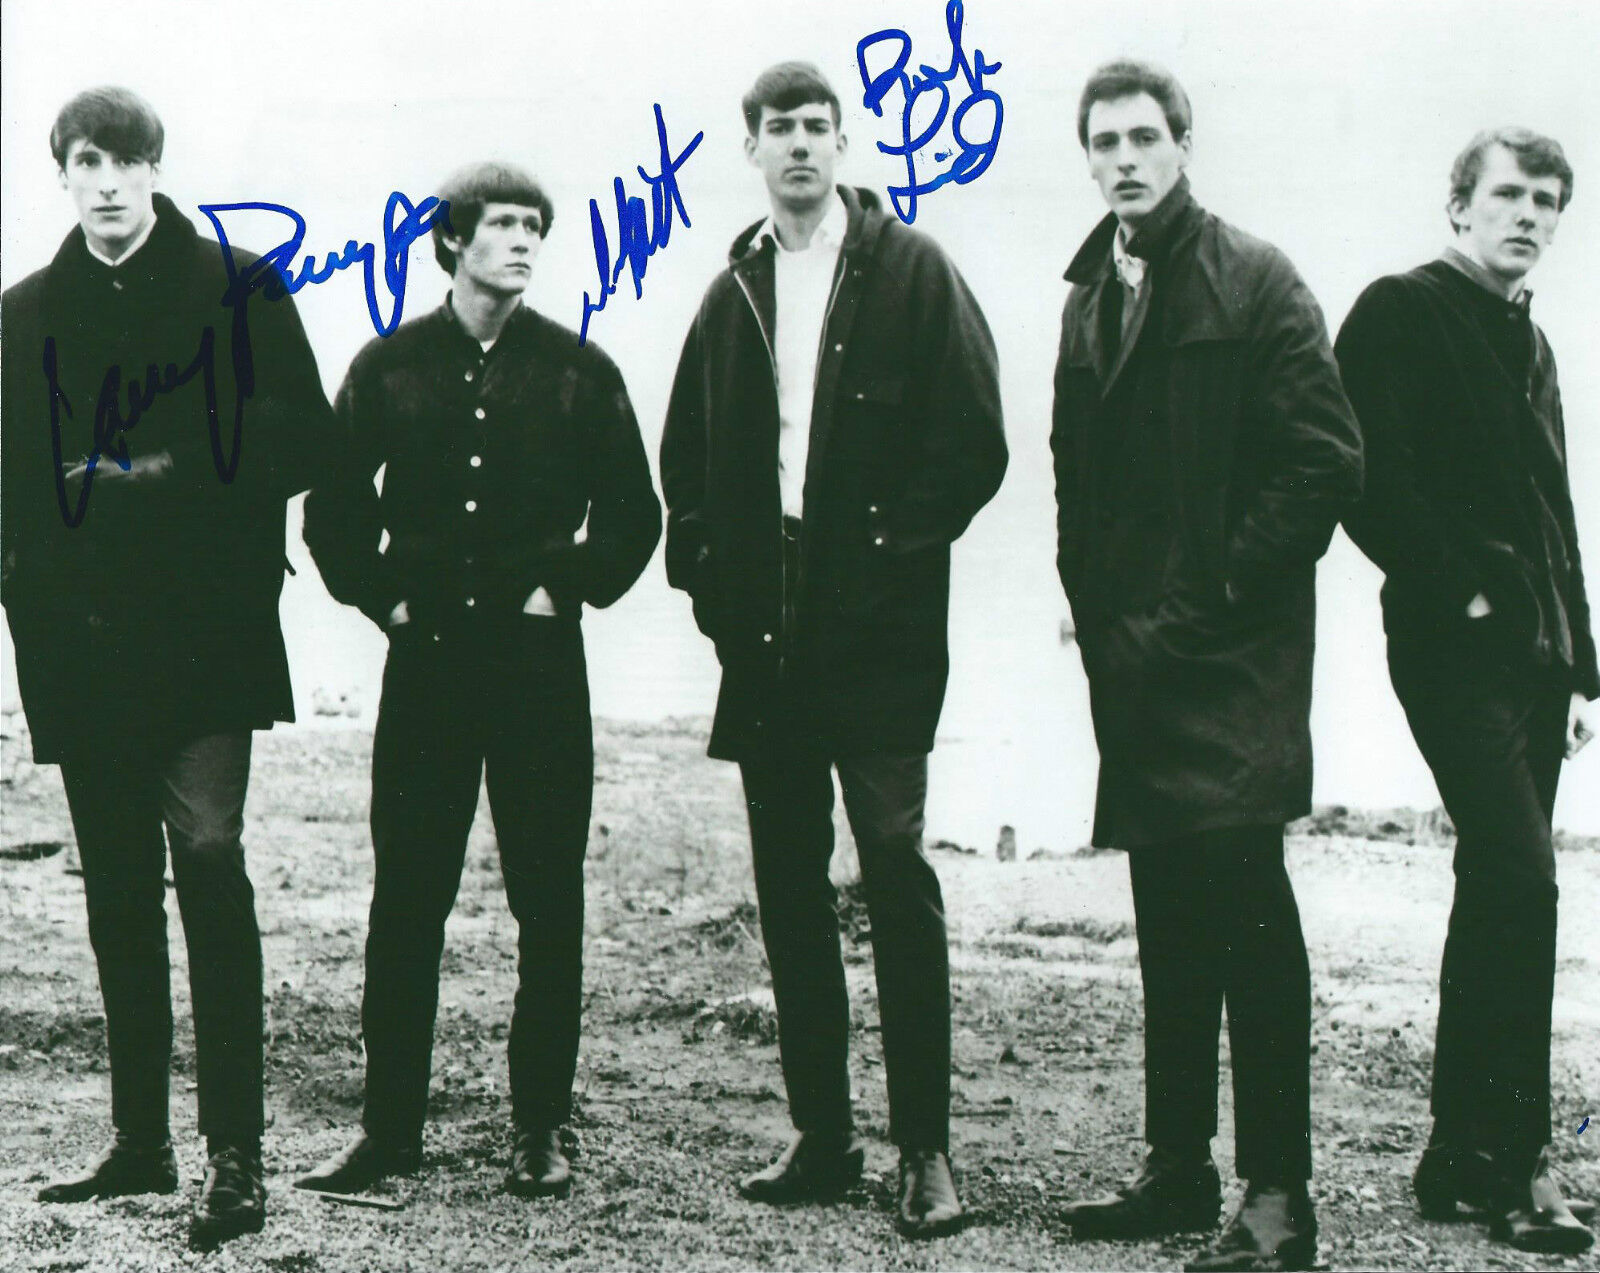 **GFA American Rock Band *THE SONICS* Signed 8x10 Photo Poster painting AD1 COA**